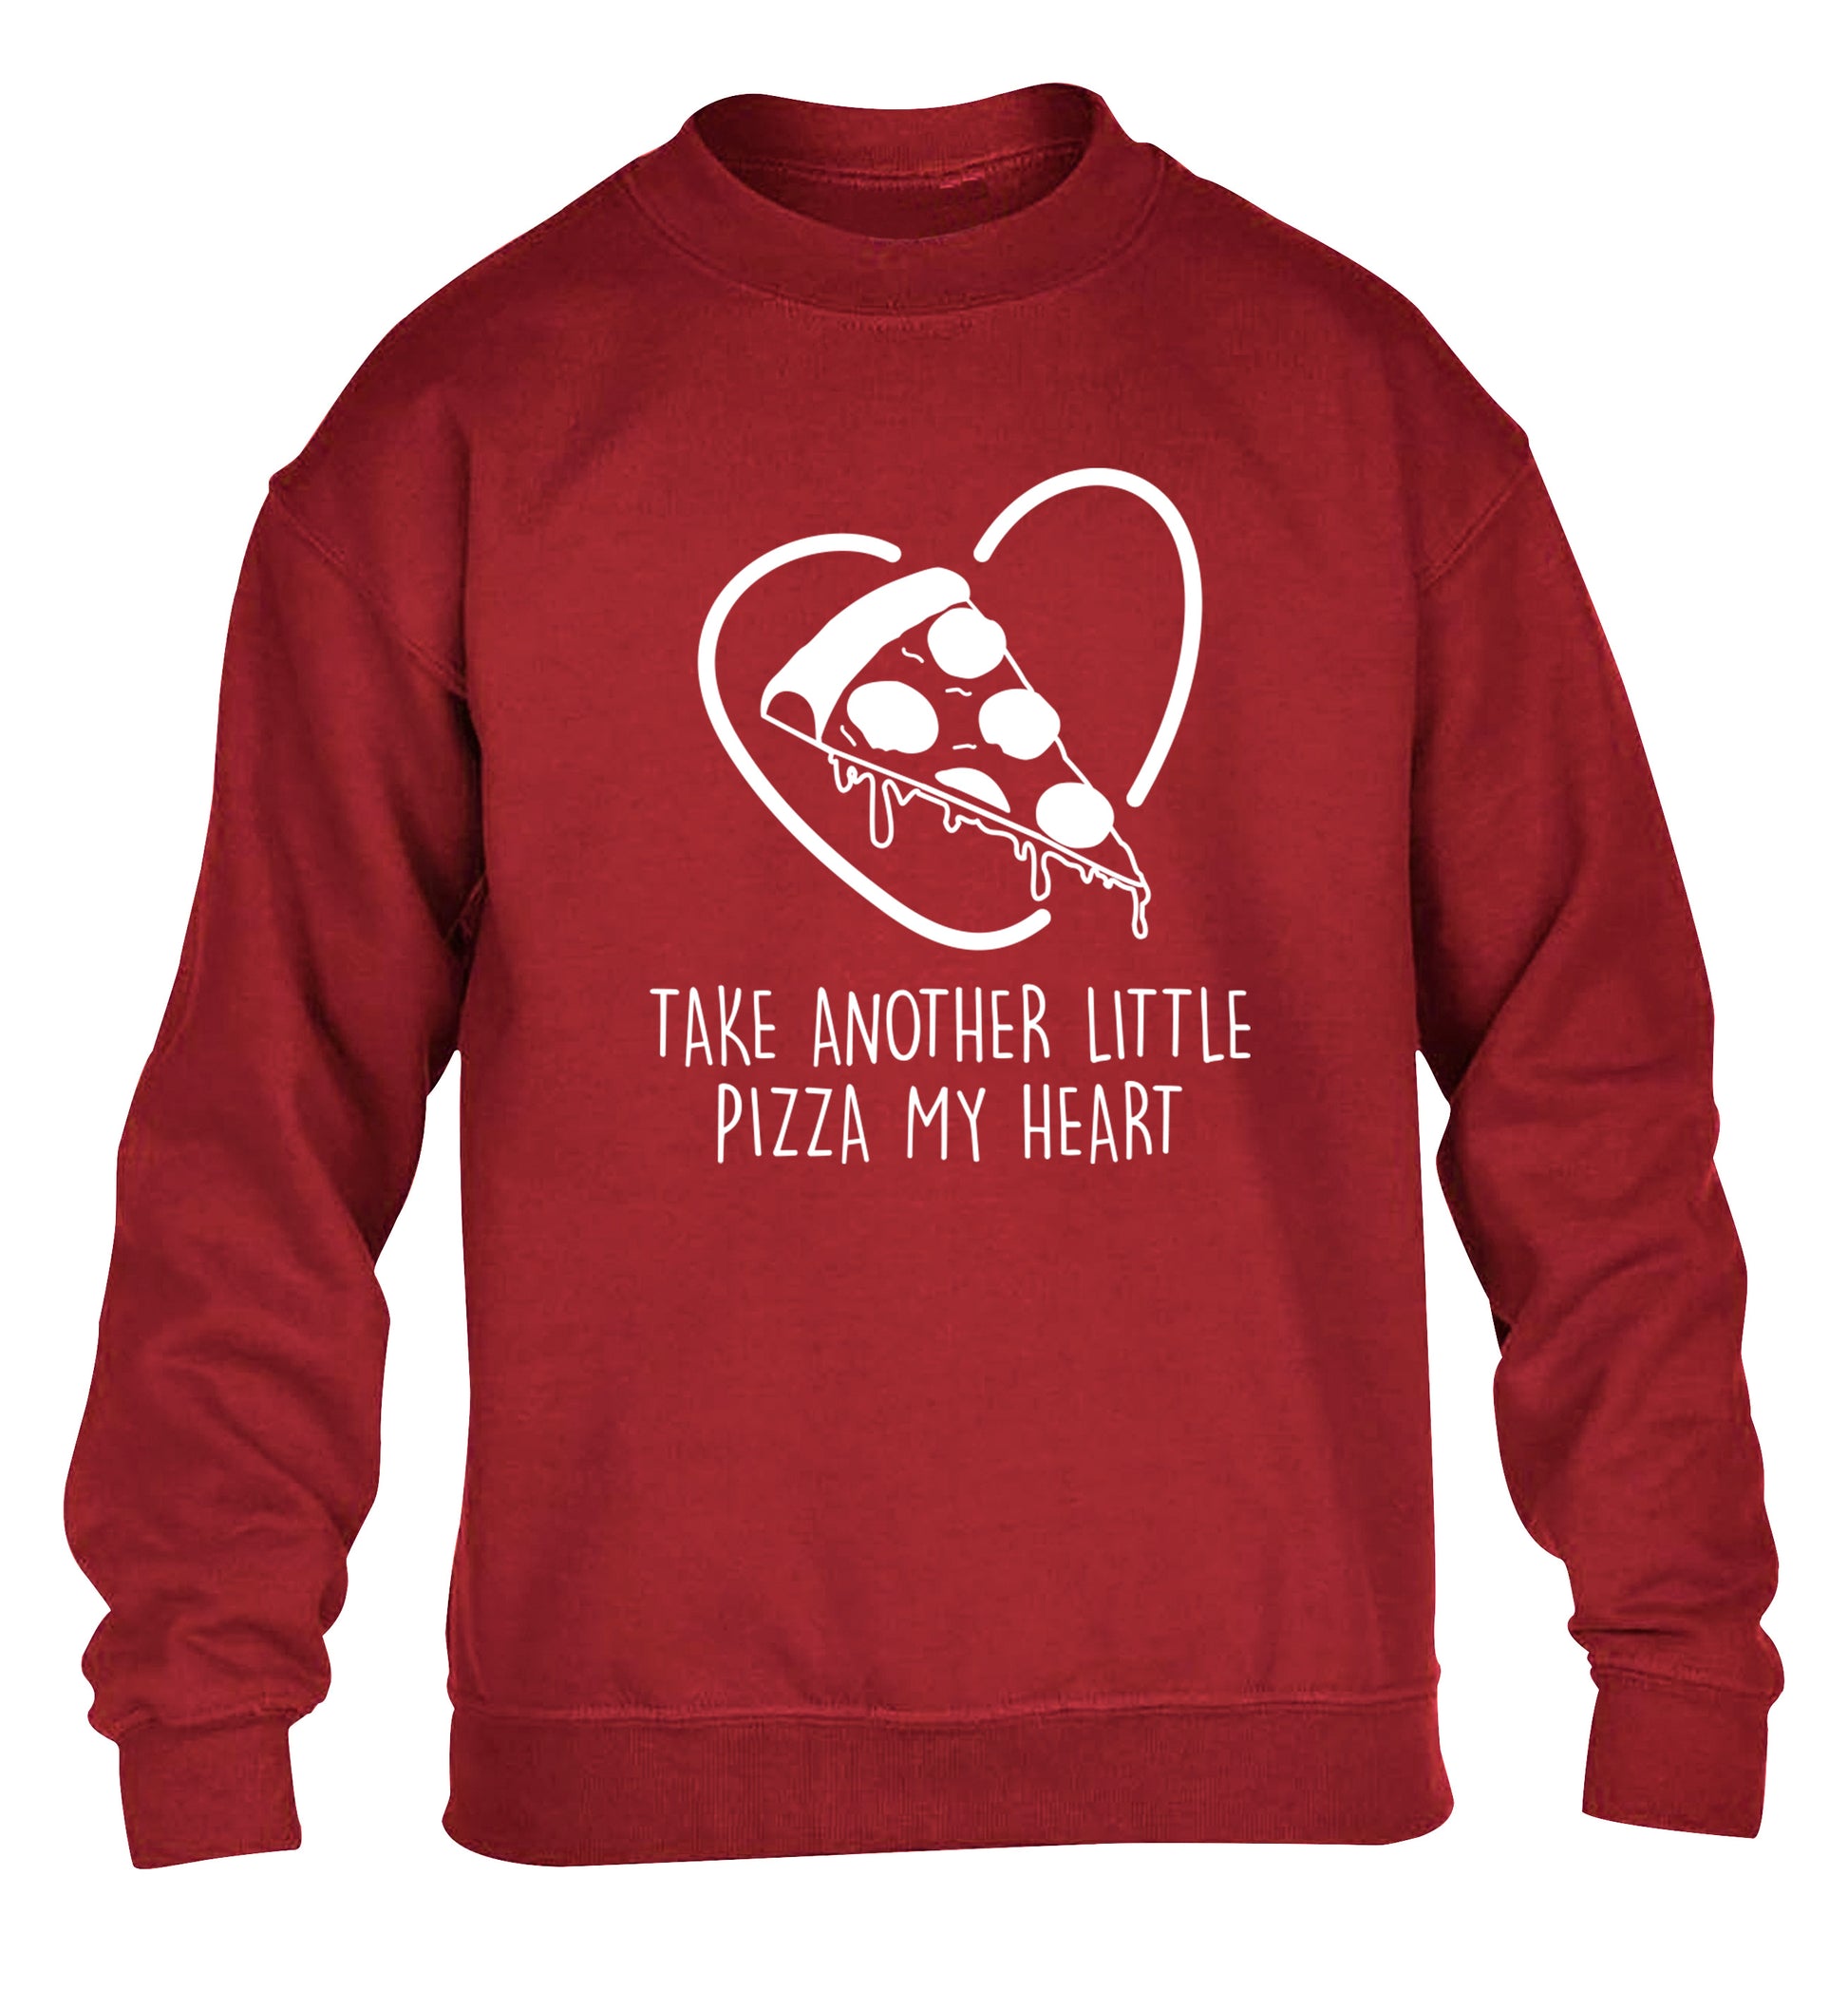 Take another little pizza my heart children's grey sweater 12-13 Years